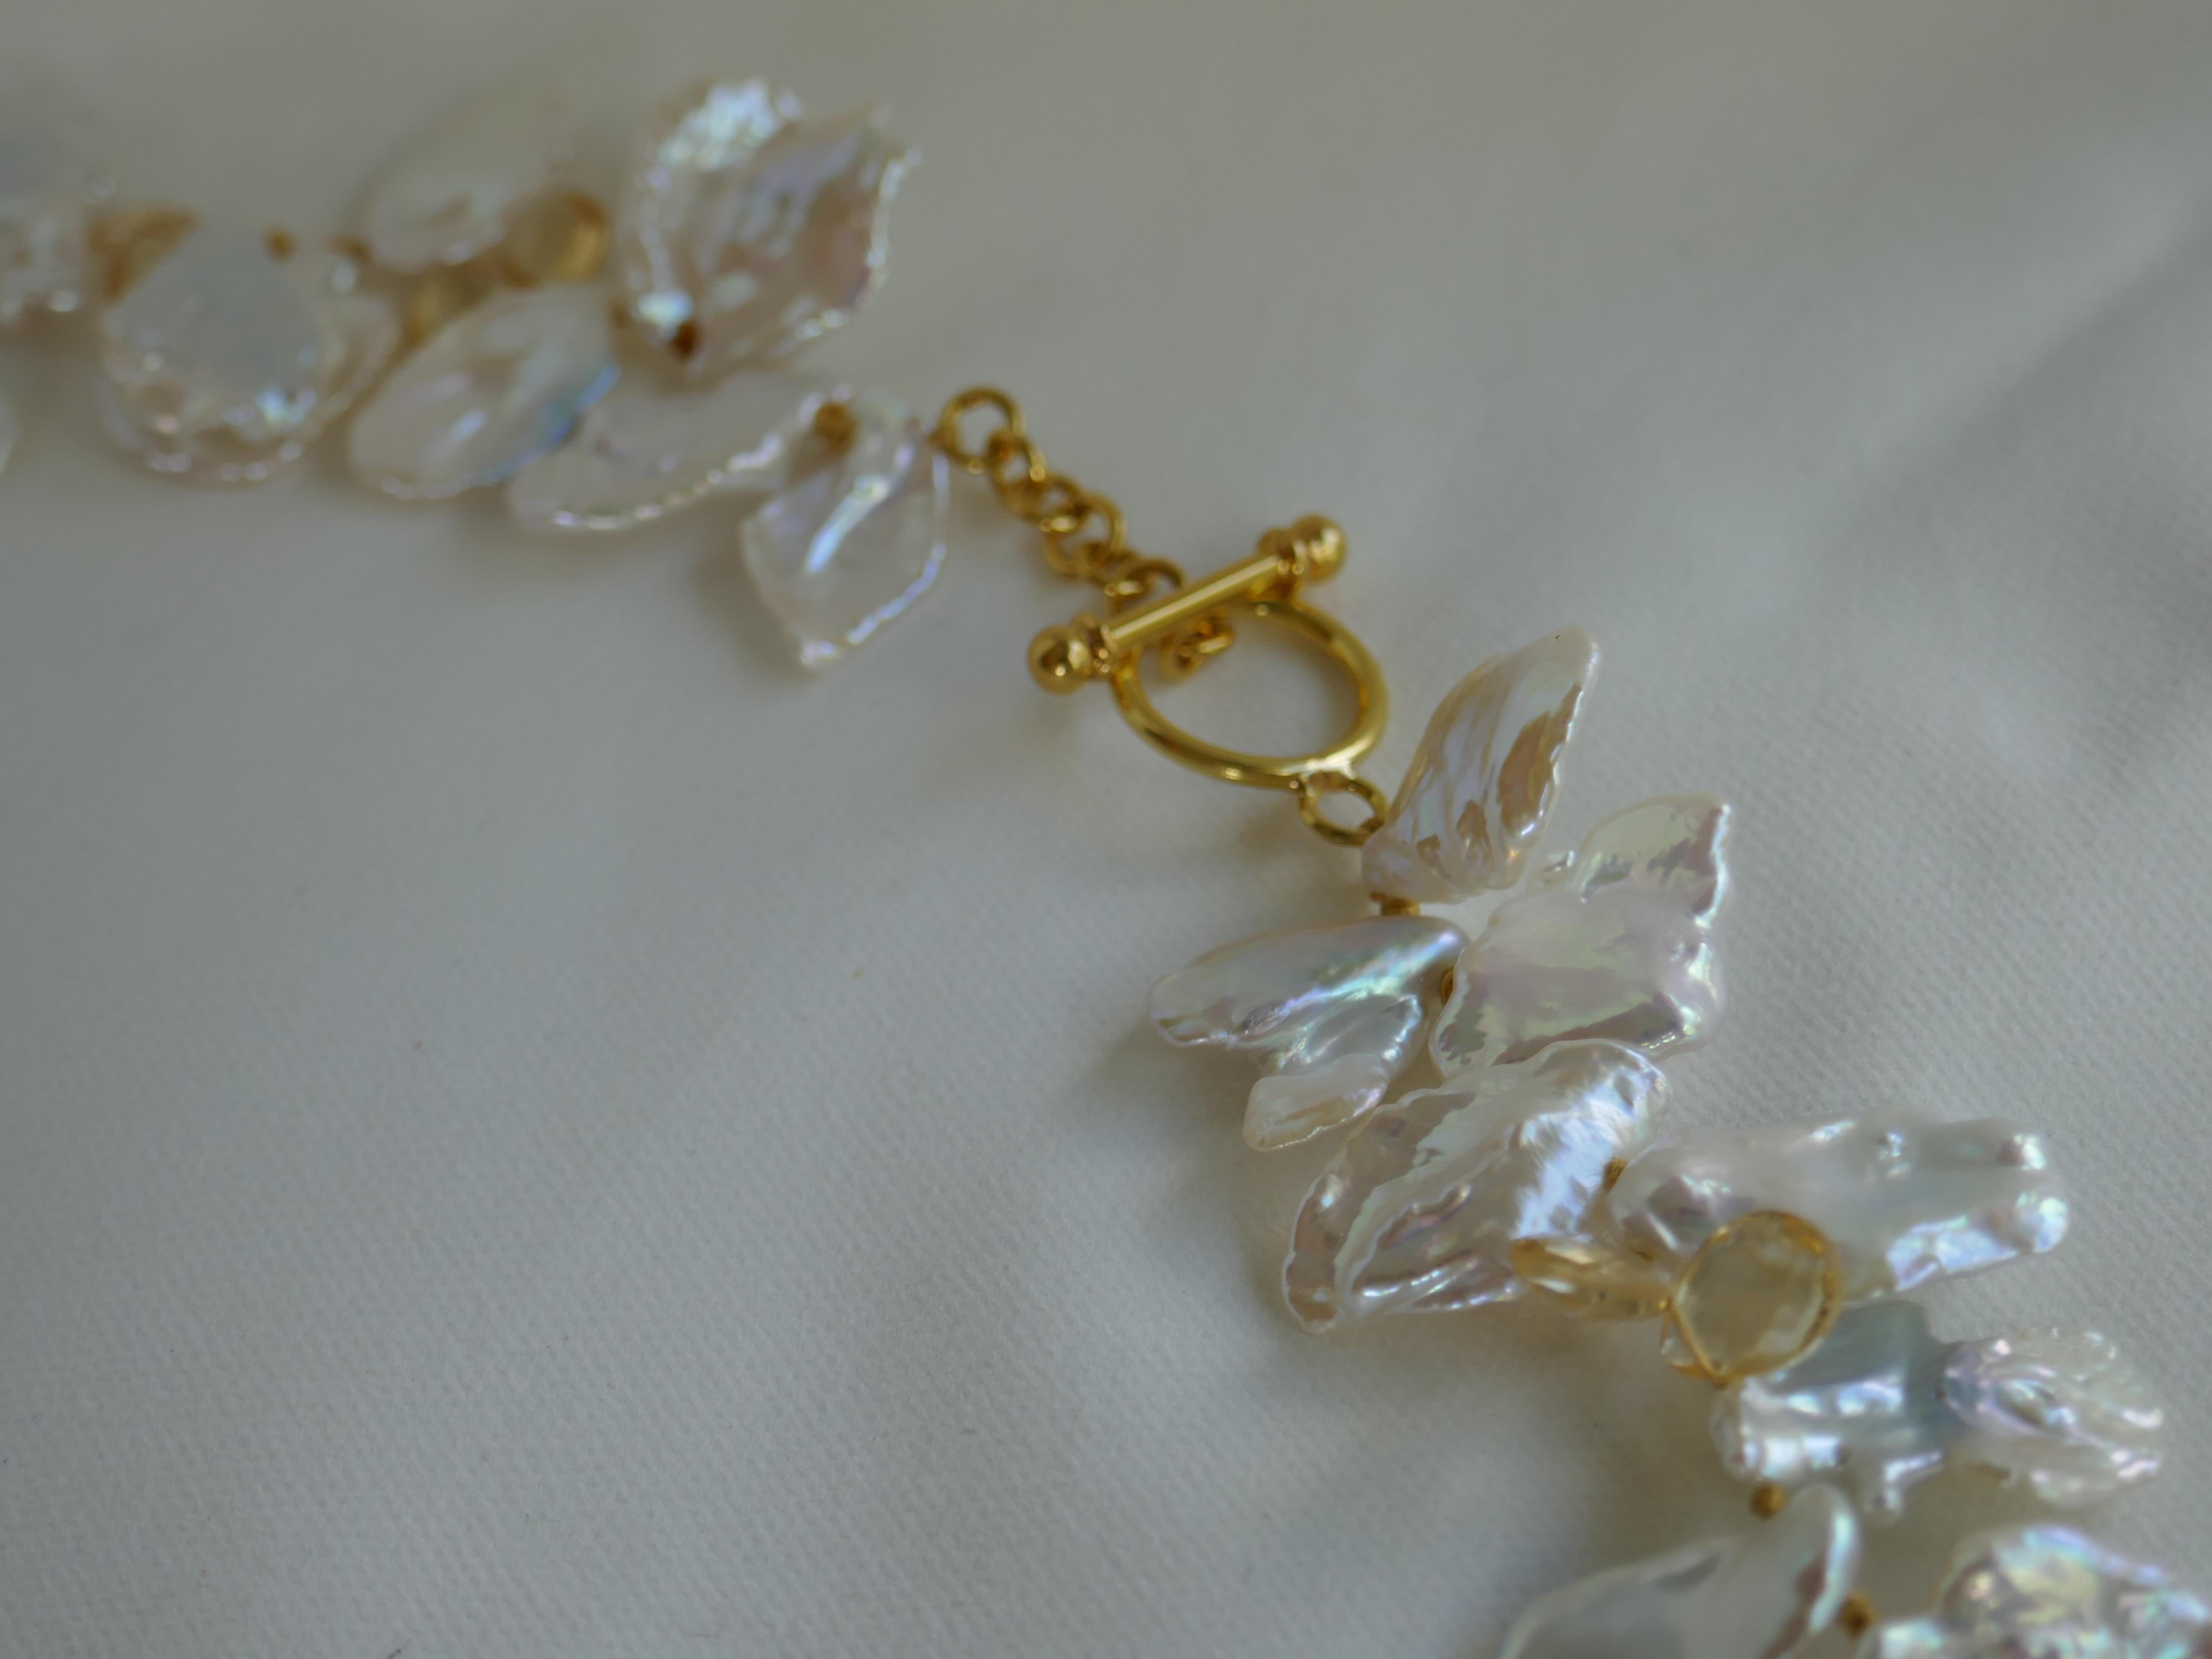 This necklace is spectacular. The white keshi pearls have great luster with little blemishes and are interspersed with citrine faceted briolettes with an 18k gold (not plated) clasp. The necklace is knotted on yellow silk thread. The keshi pearls